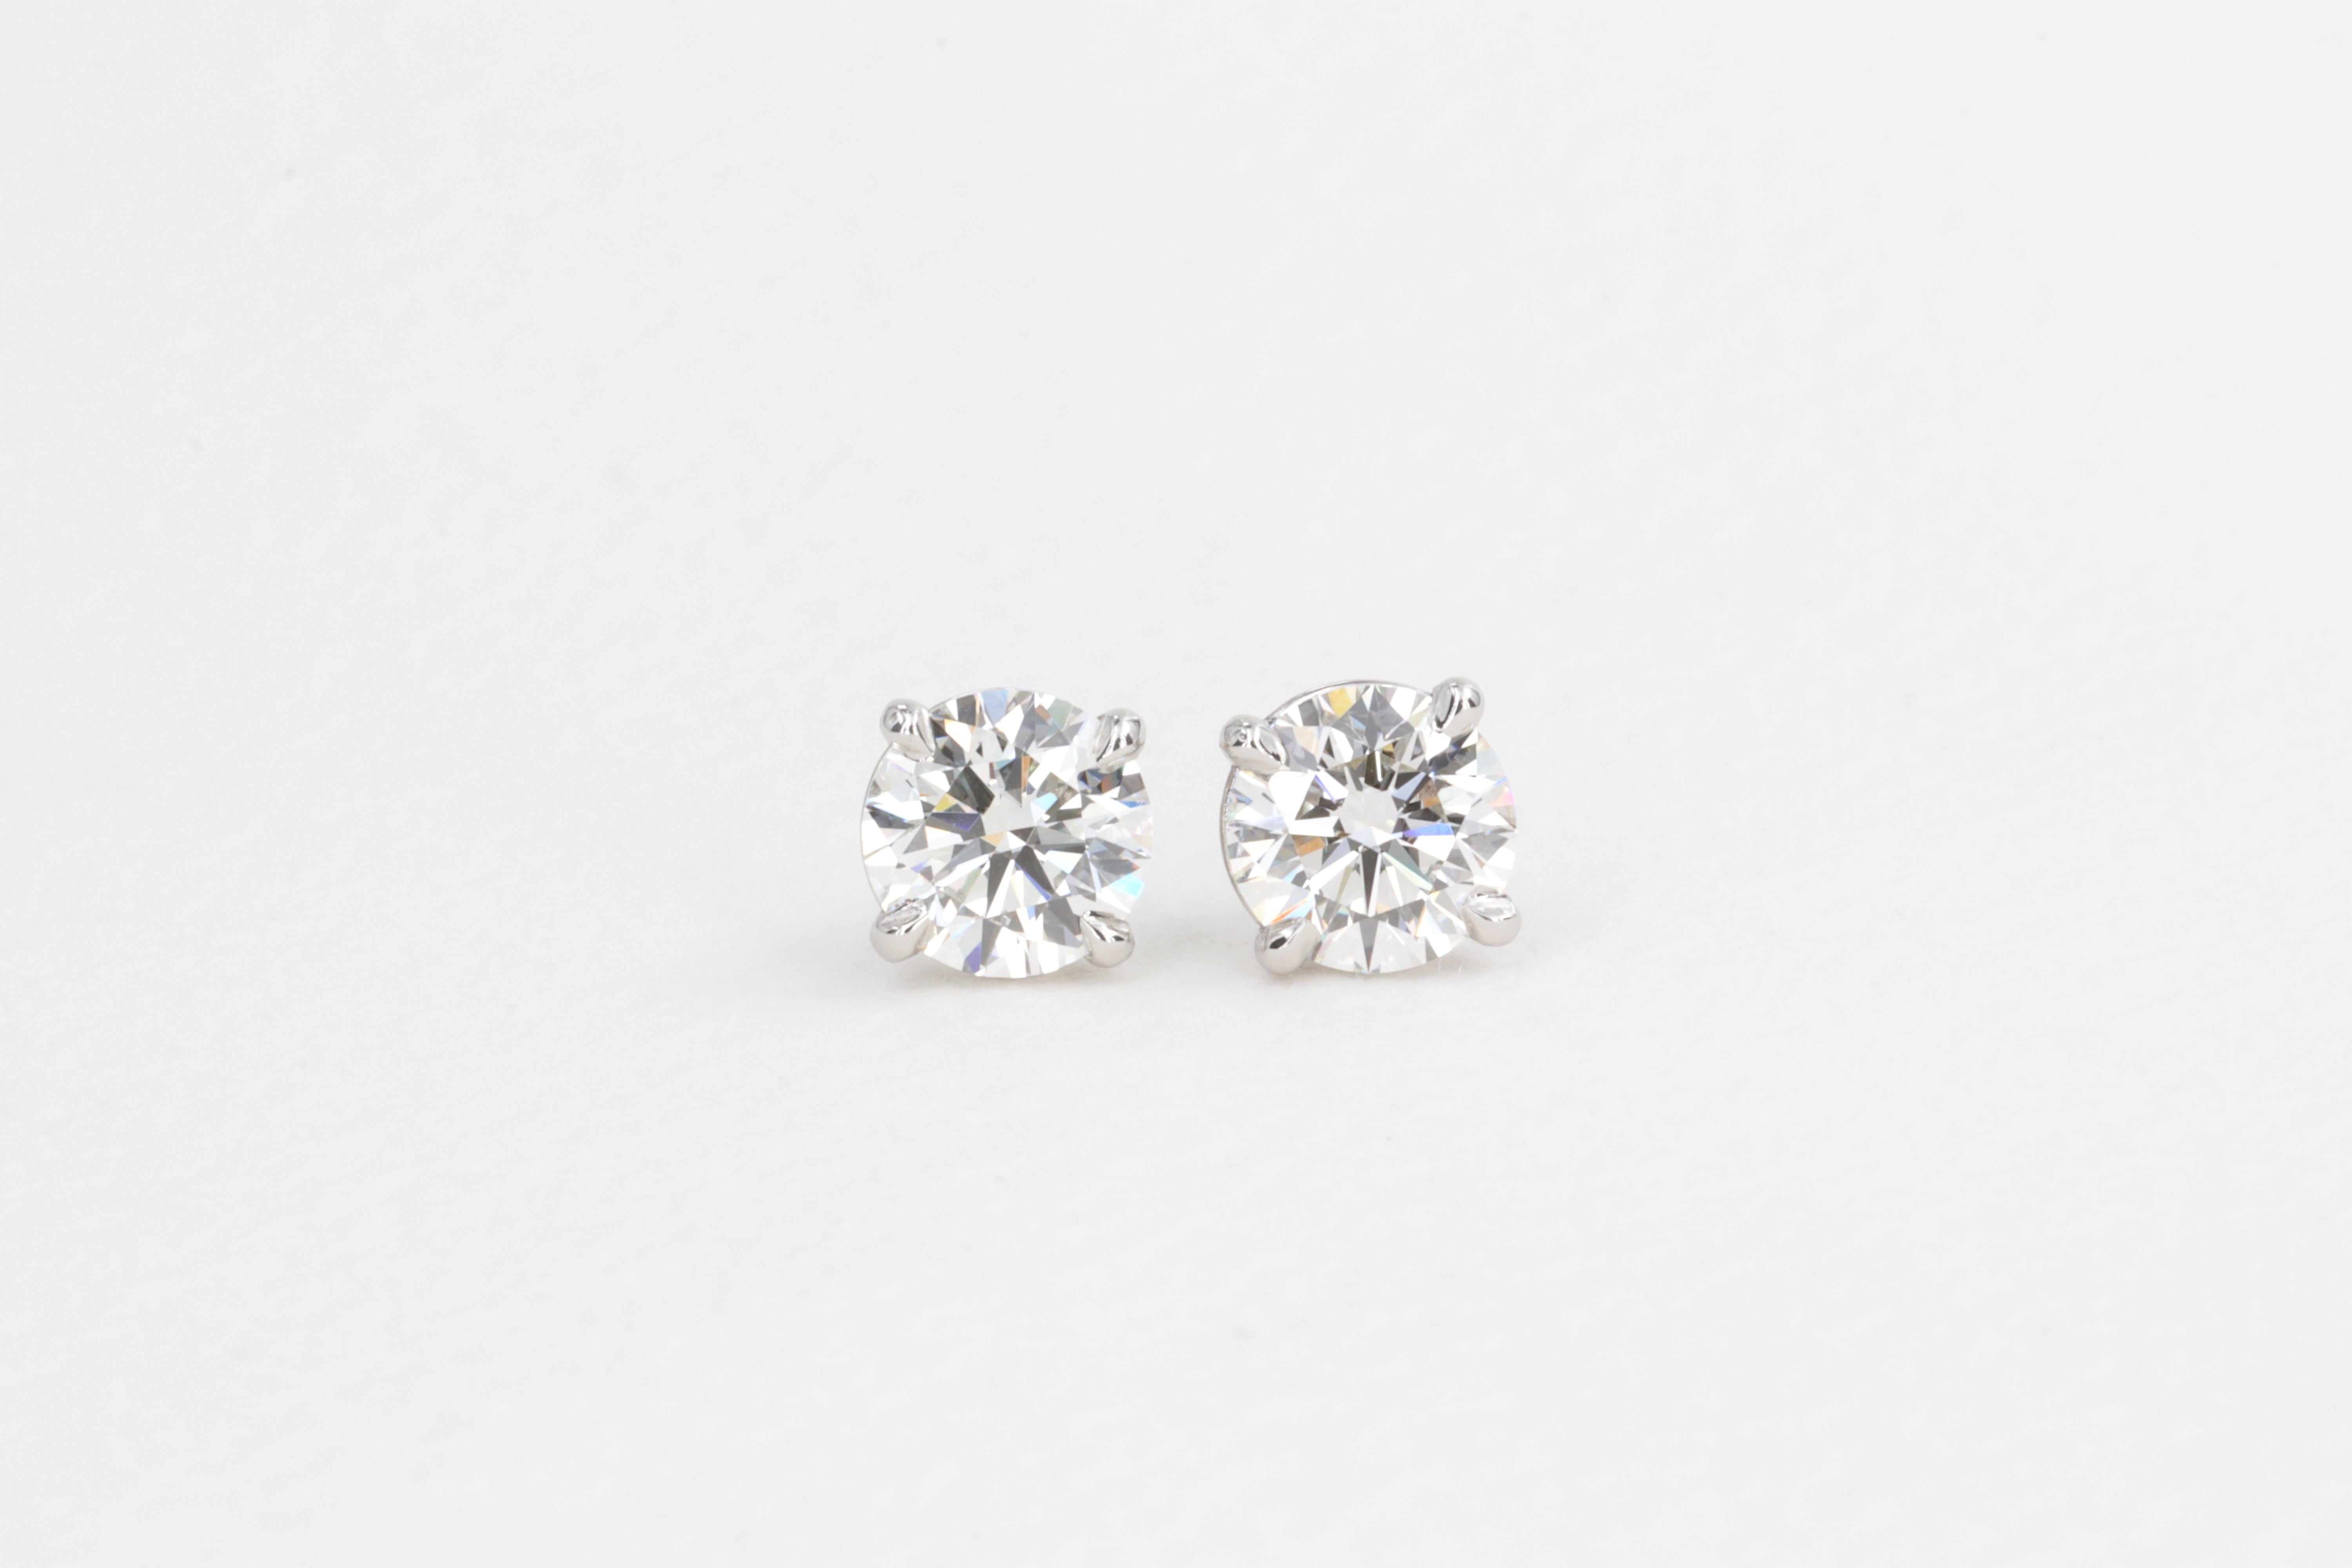 Round Cut Forevermark Diamond Stud Earrings 1.40 Carats H Color VVS2 Clarity in Platinum For Sale